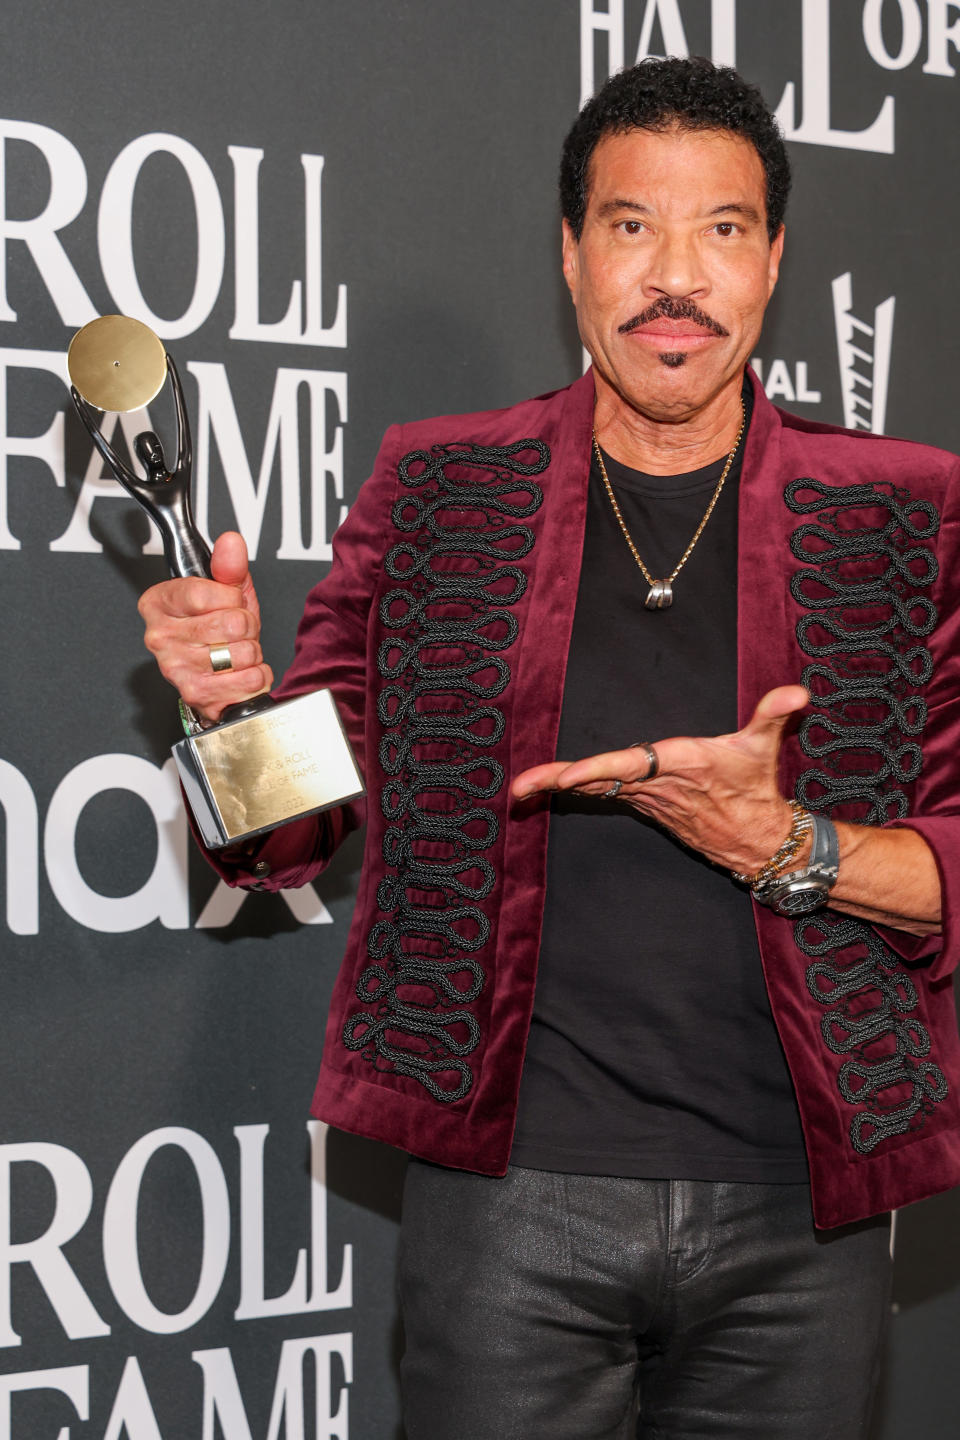 Lionel Richie at the 2022 Rock &amp; Roll Hall of Fame Induction Ceremony Red Carpet held at the Microsoft Theatre on November 5, 2022 in Los Angeles, California.